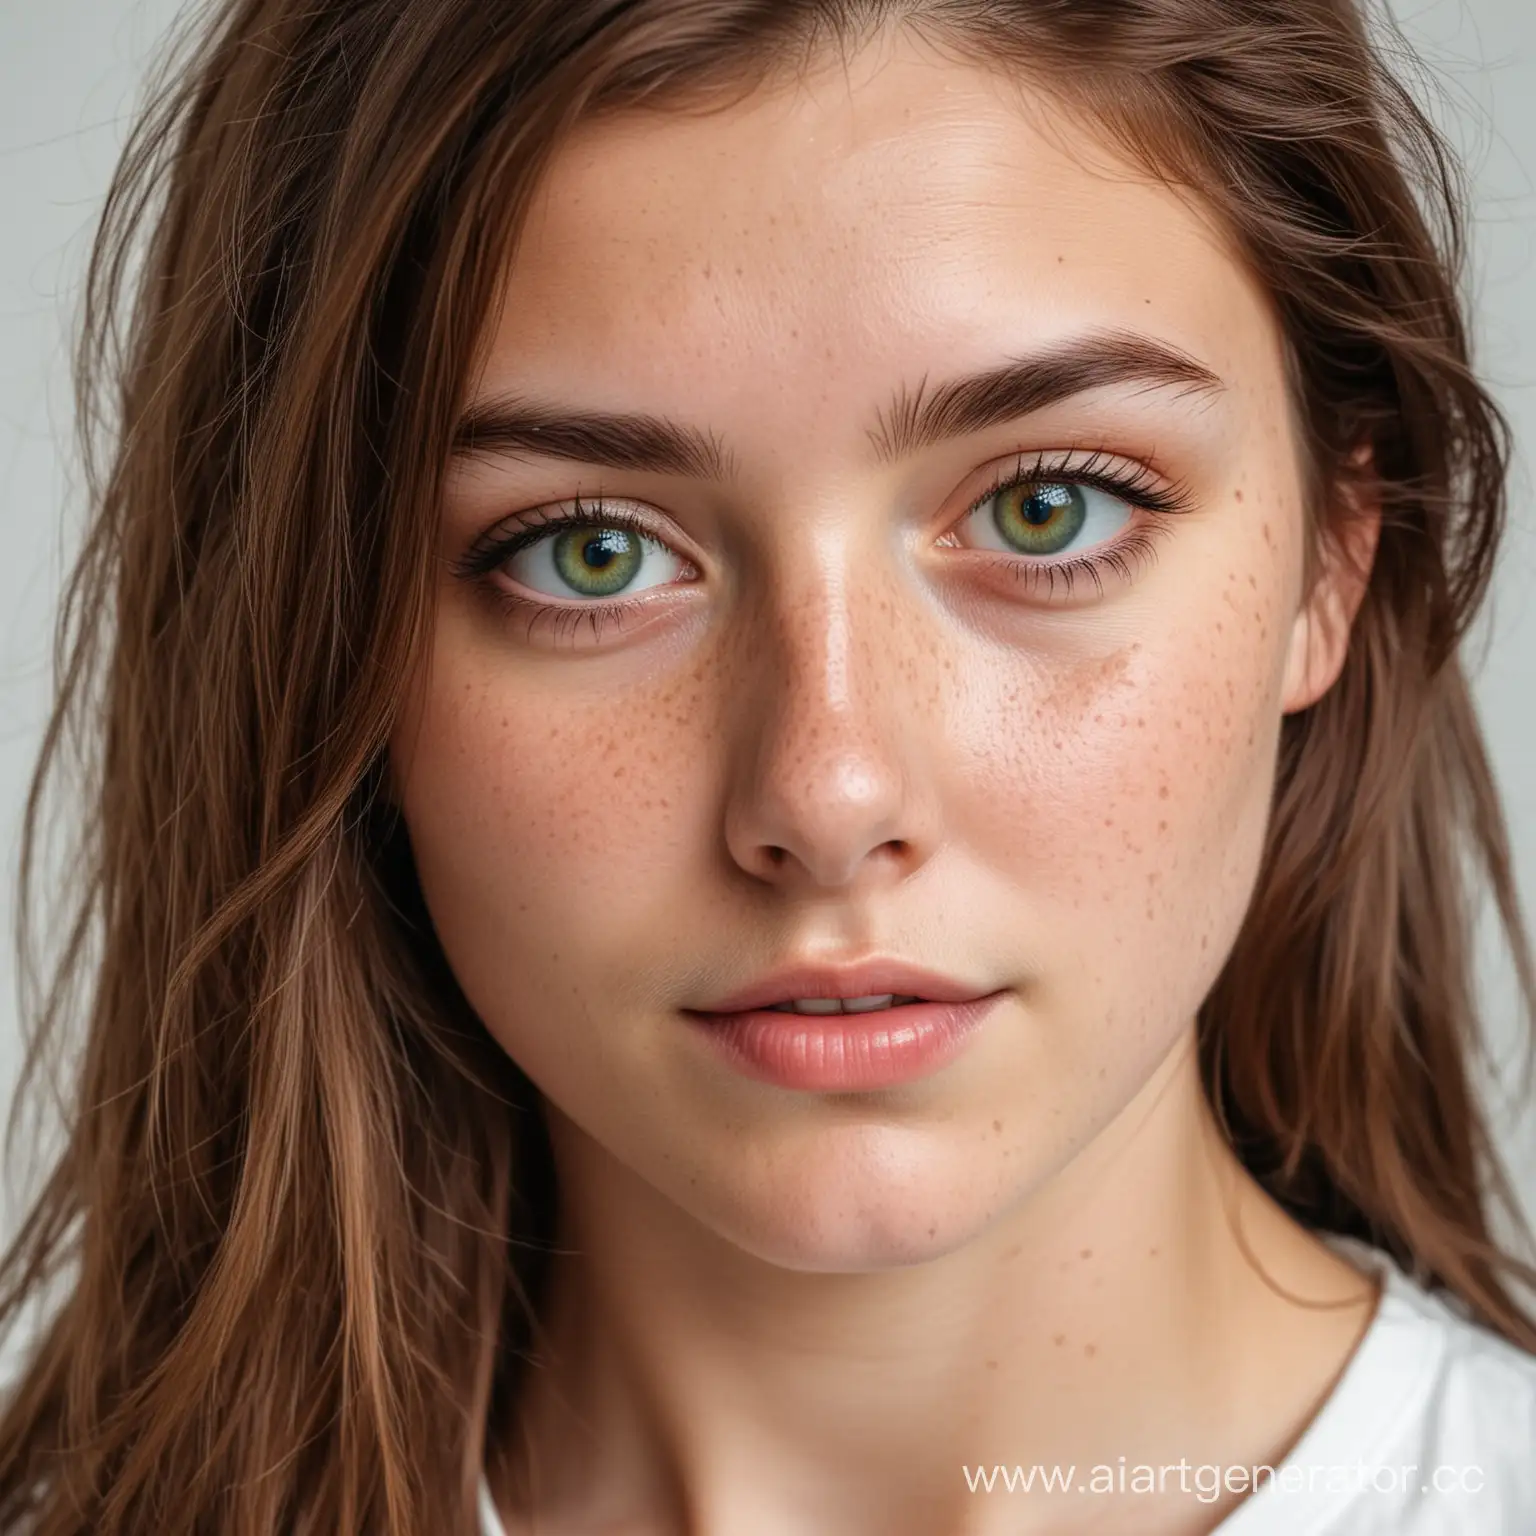 Young-Female-Photographer-Portrait-with-Camera-and-Green-Eyes